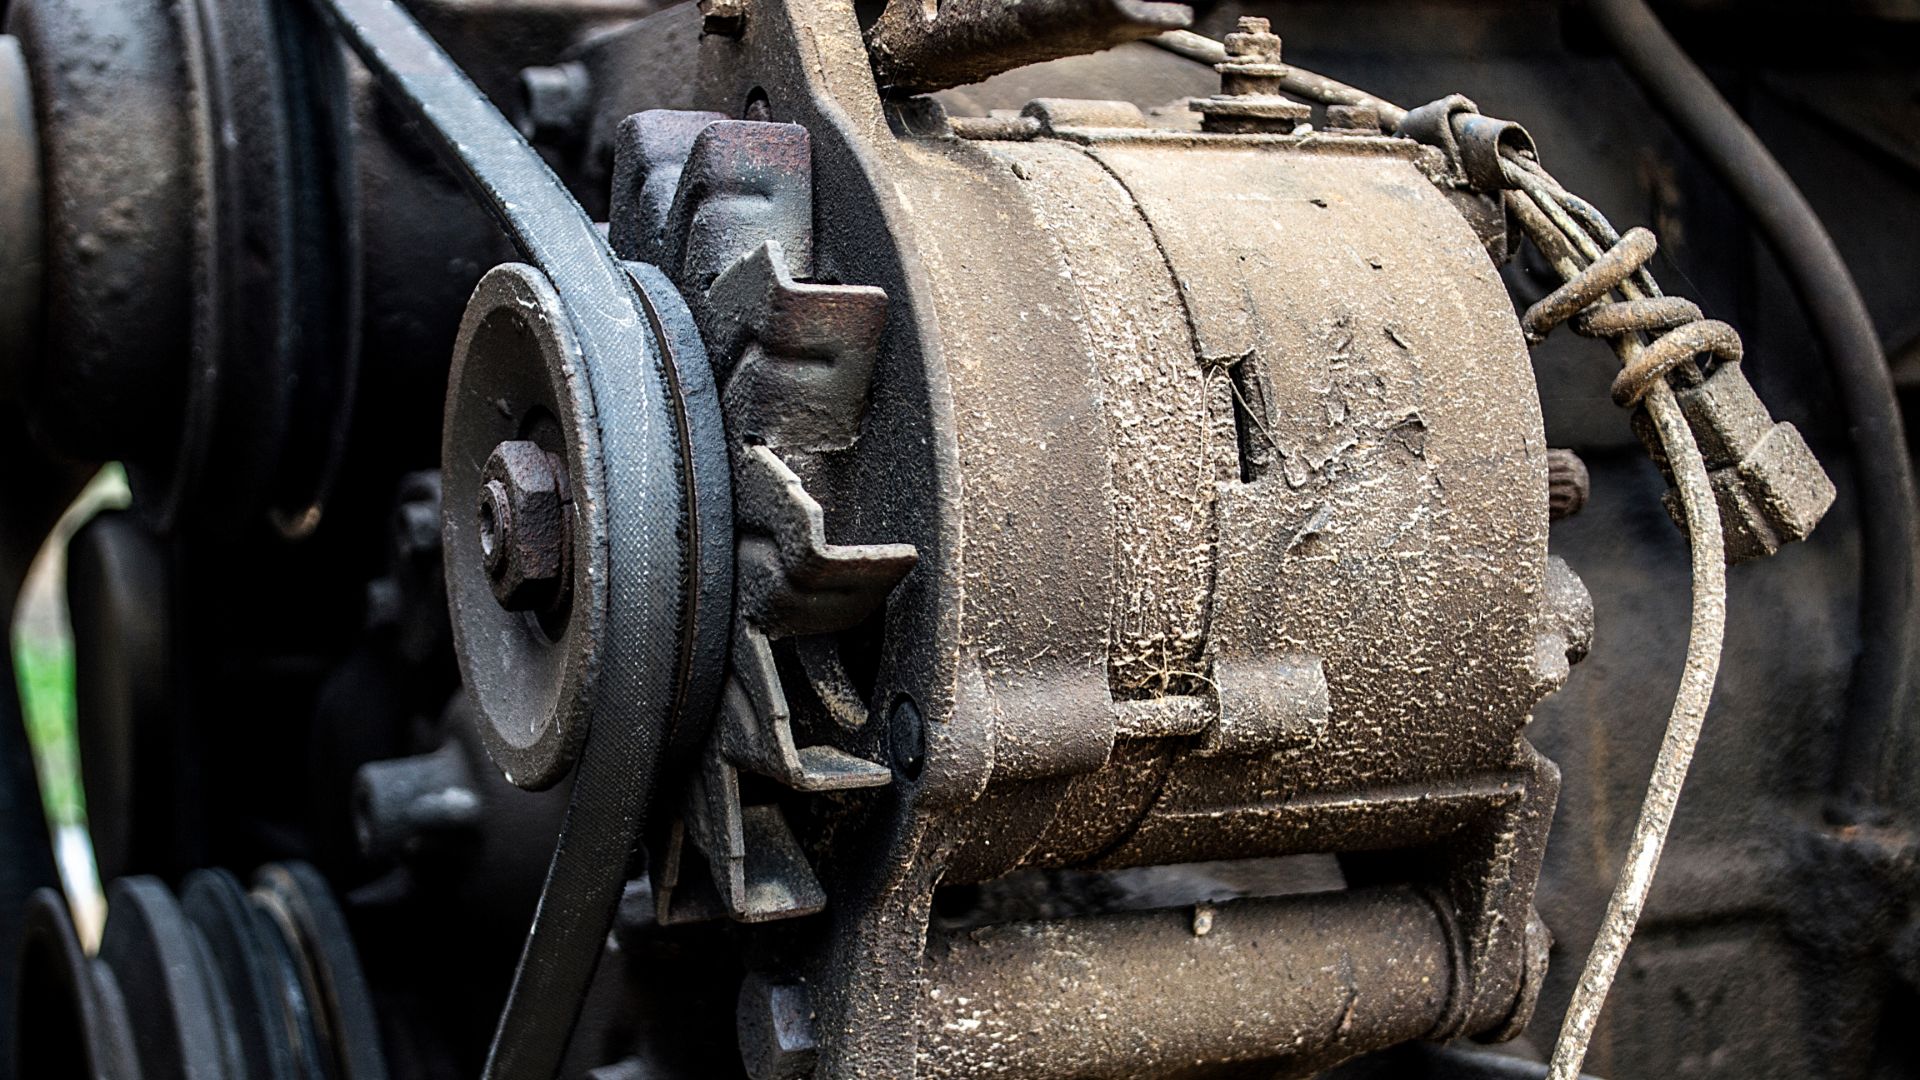 a close up of an old train engine.